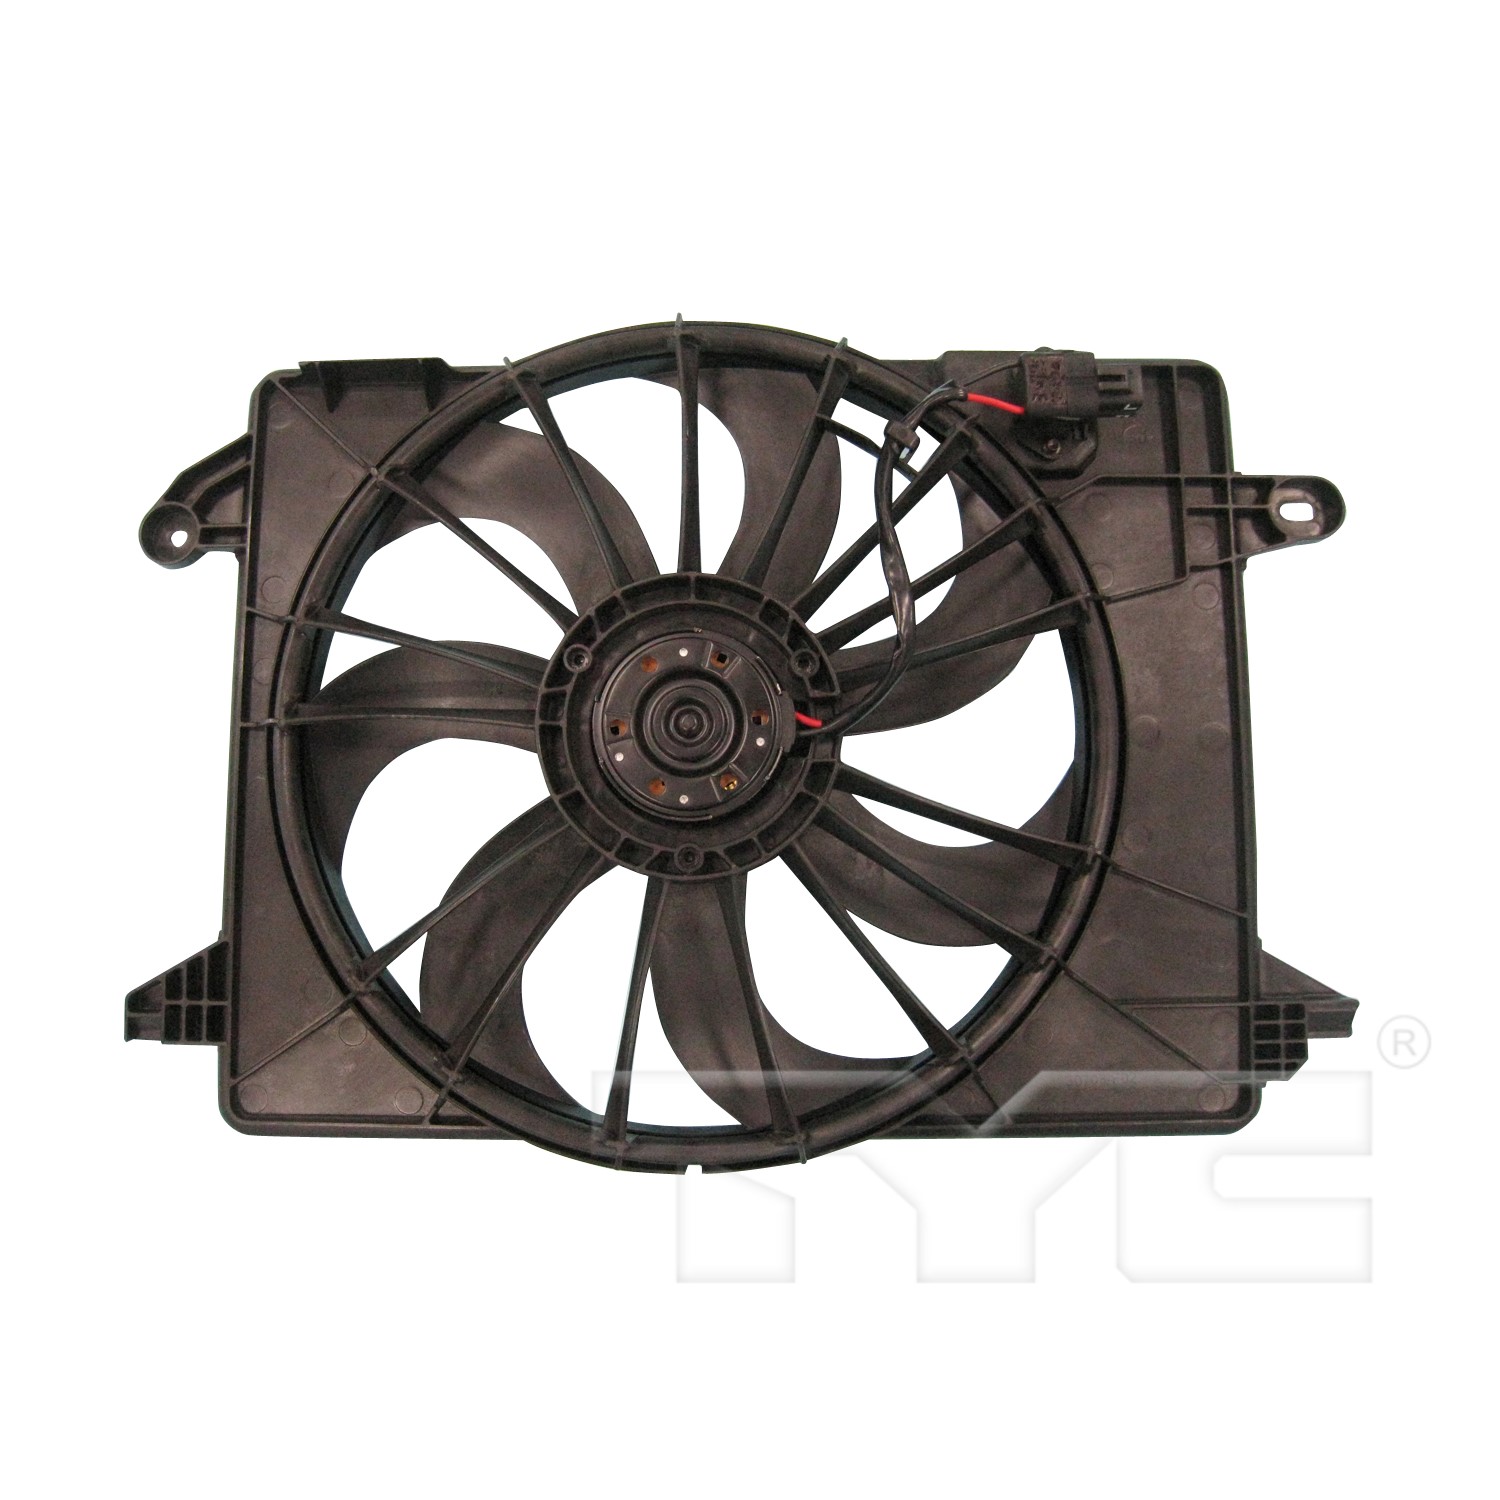 Aftermarket FAN ASSEMBLY/FAN SHROUDS for DODGE - CHARGER, CHARGER,09-14,Radiator cooling fan assy